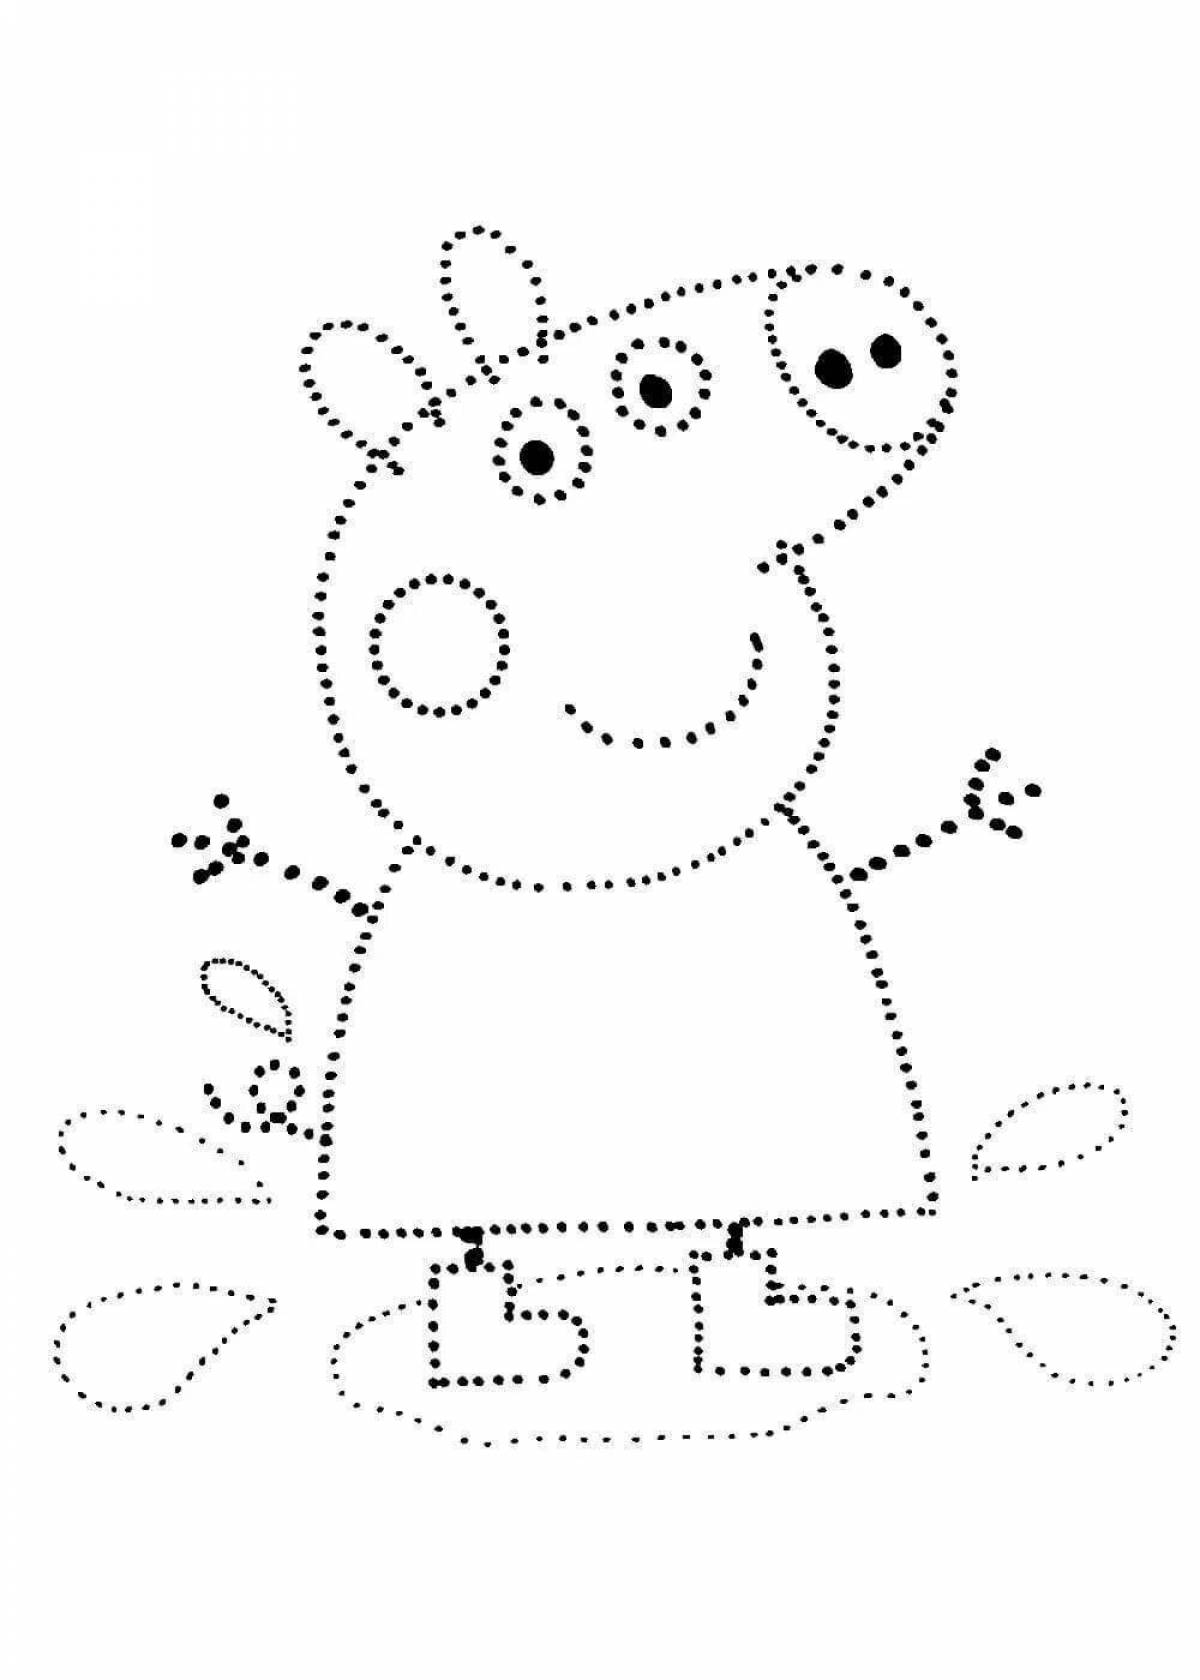 Dot-to-Dot for 5 year olds #21